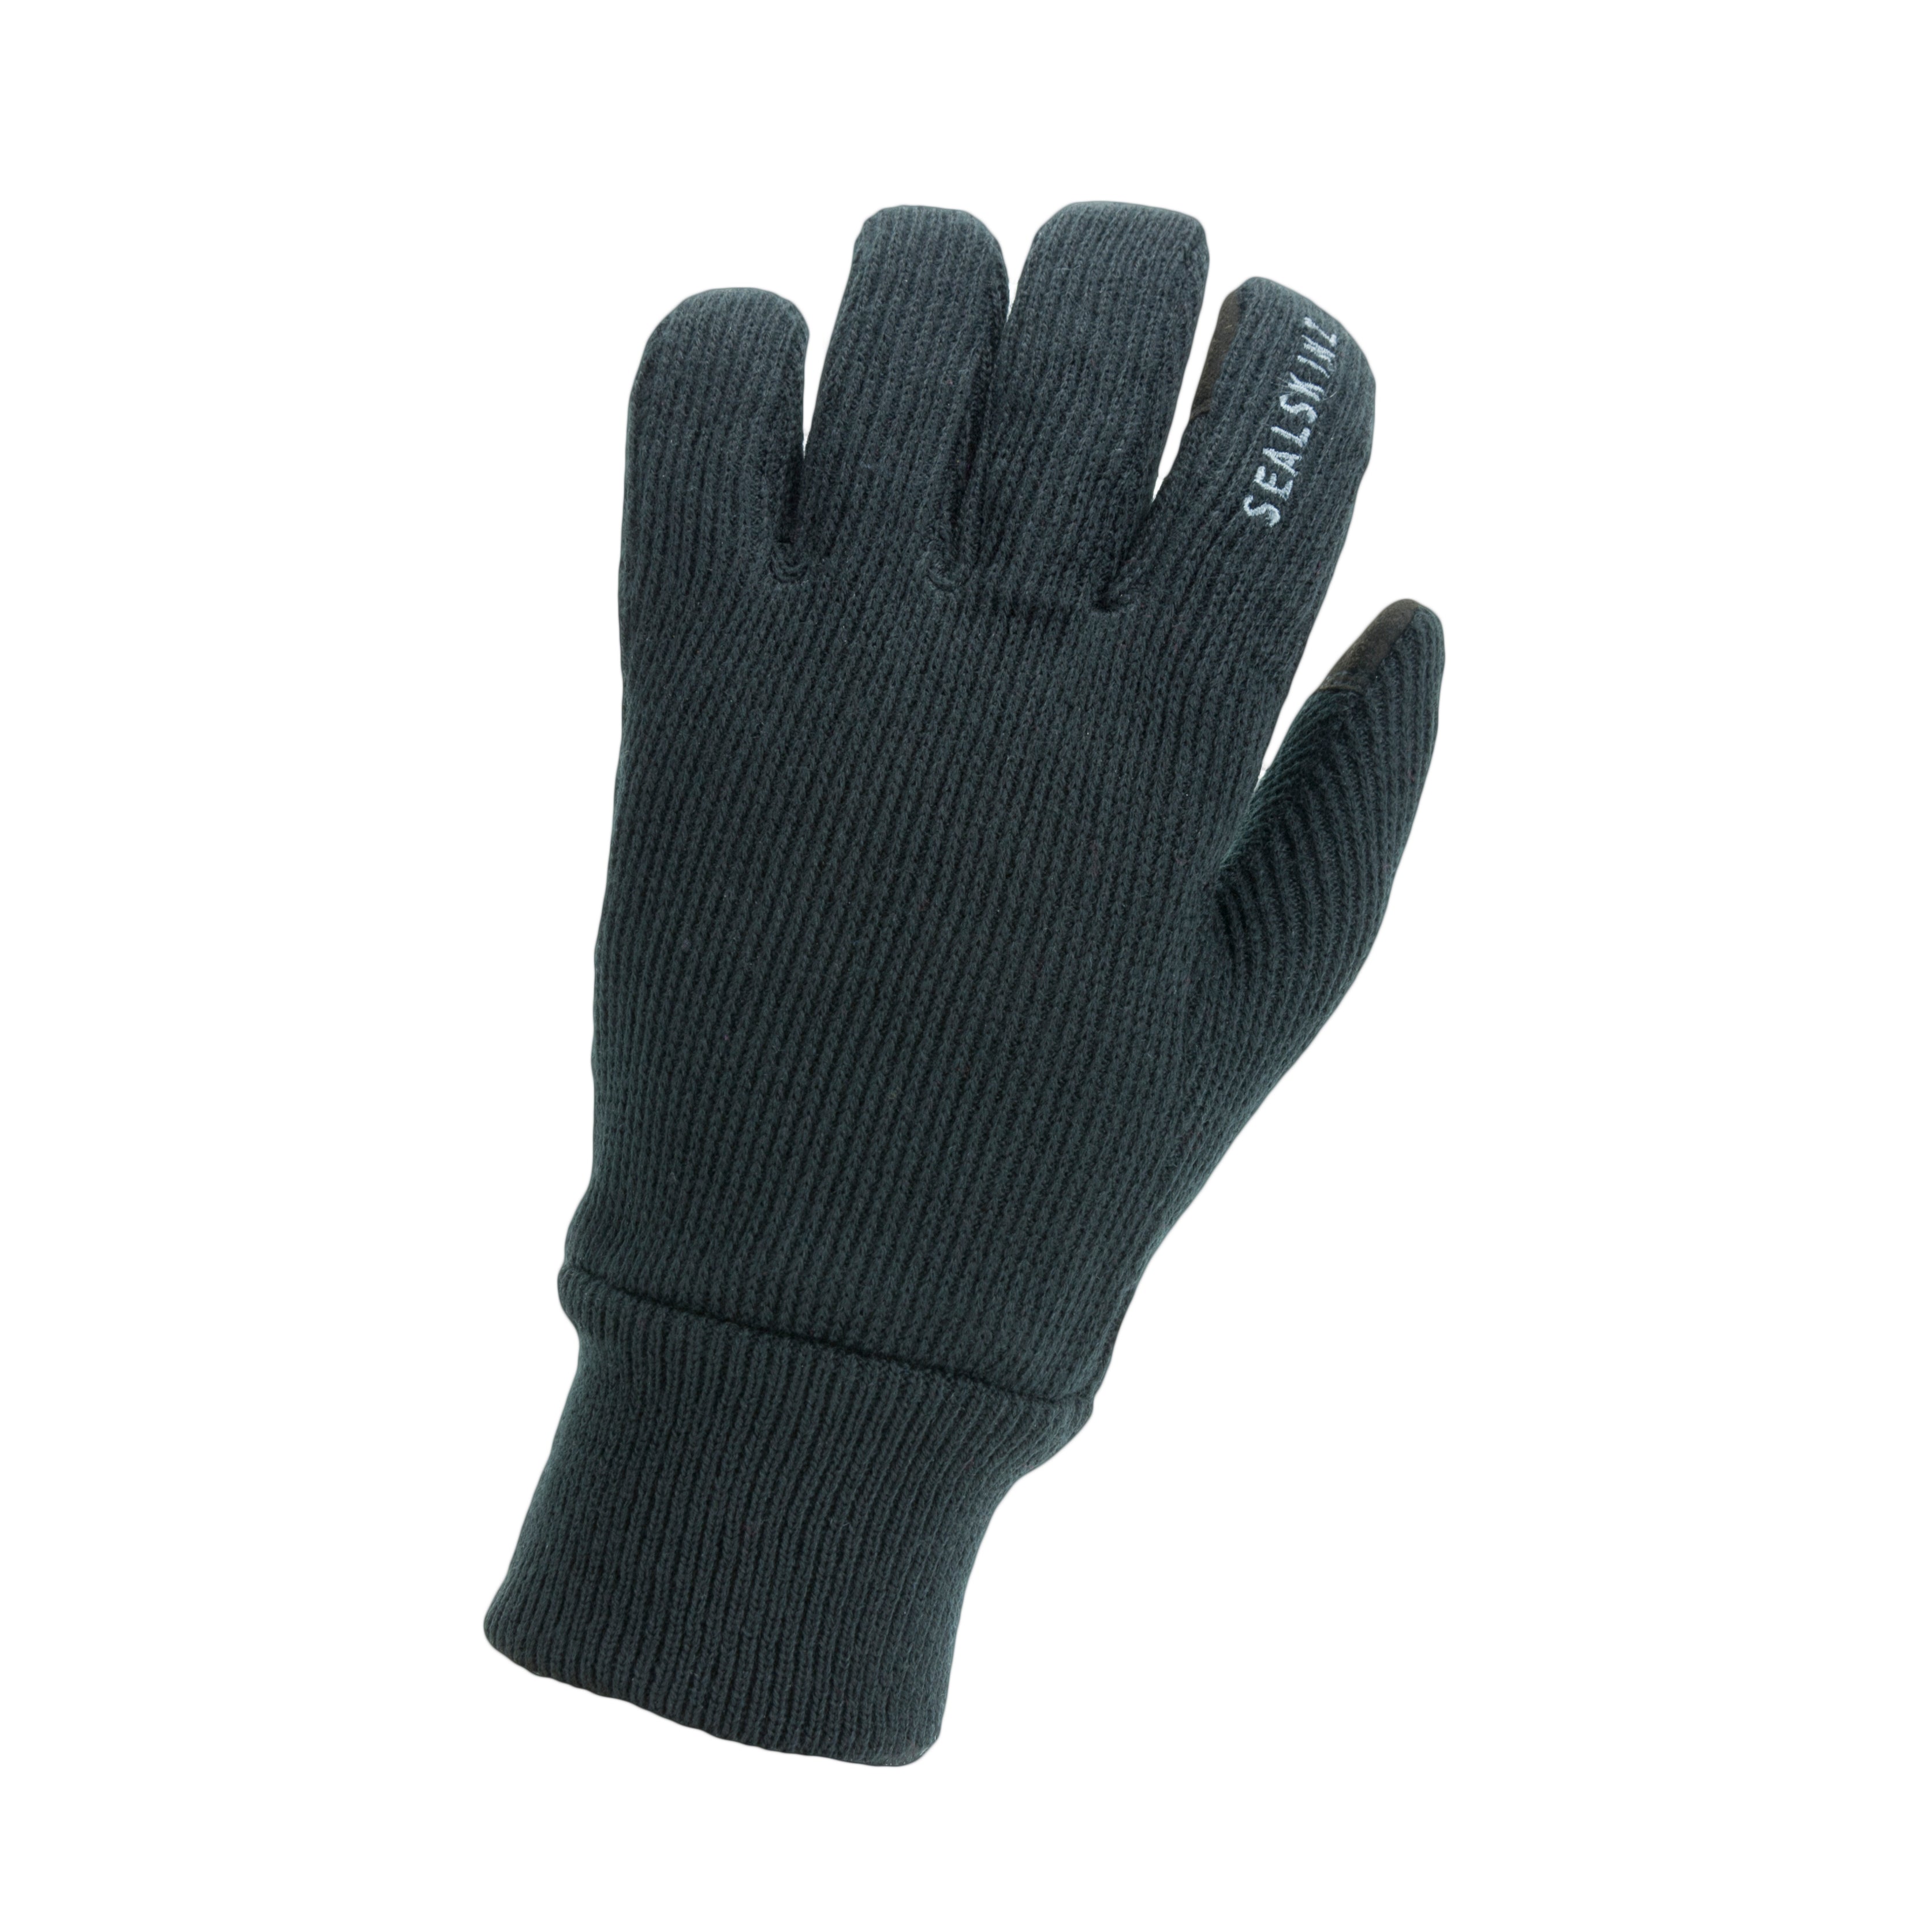 Windproof All Weather Knitted Glove - Size: S - Color: Black